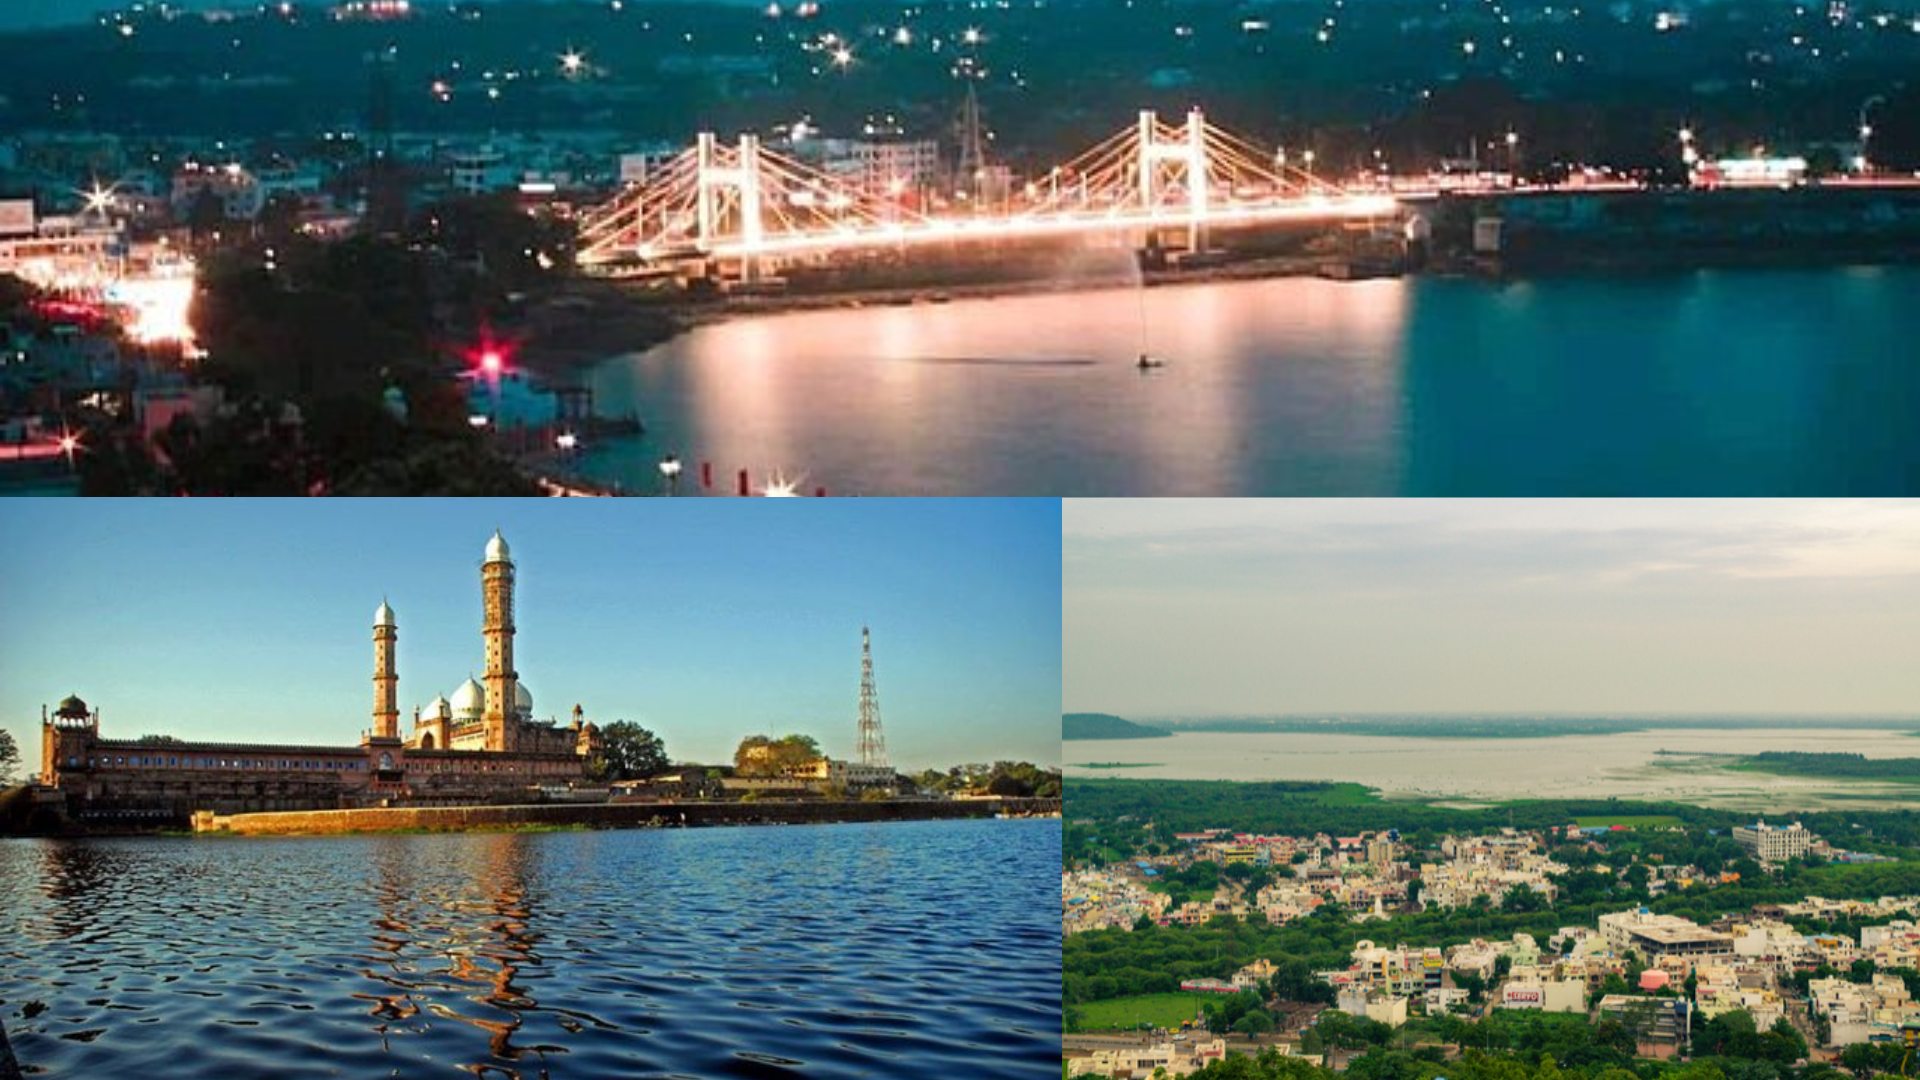 About and History of Bhopal